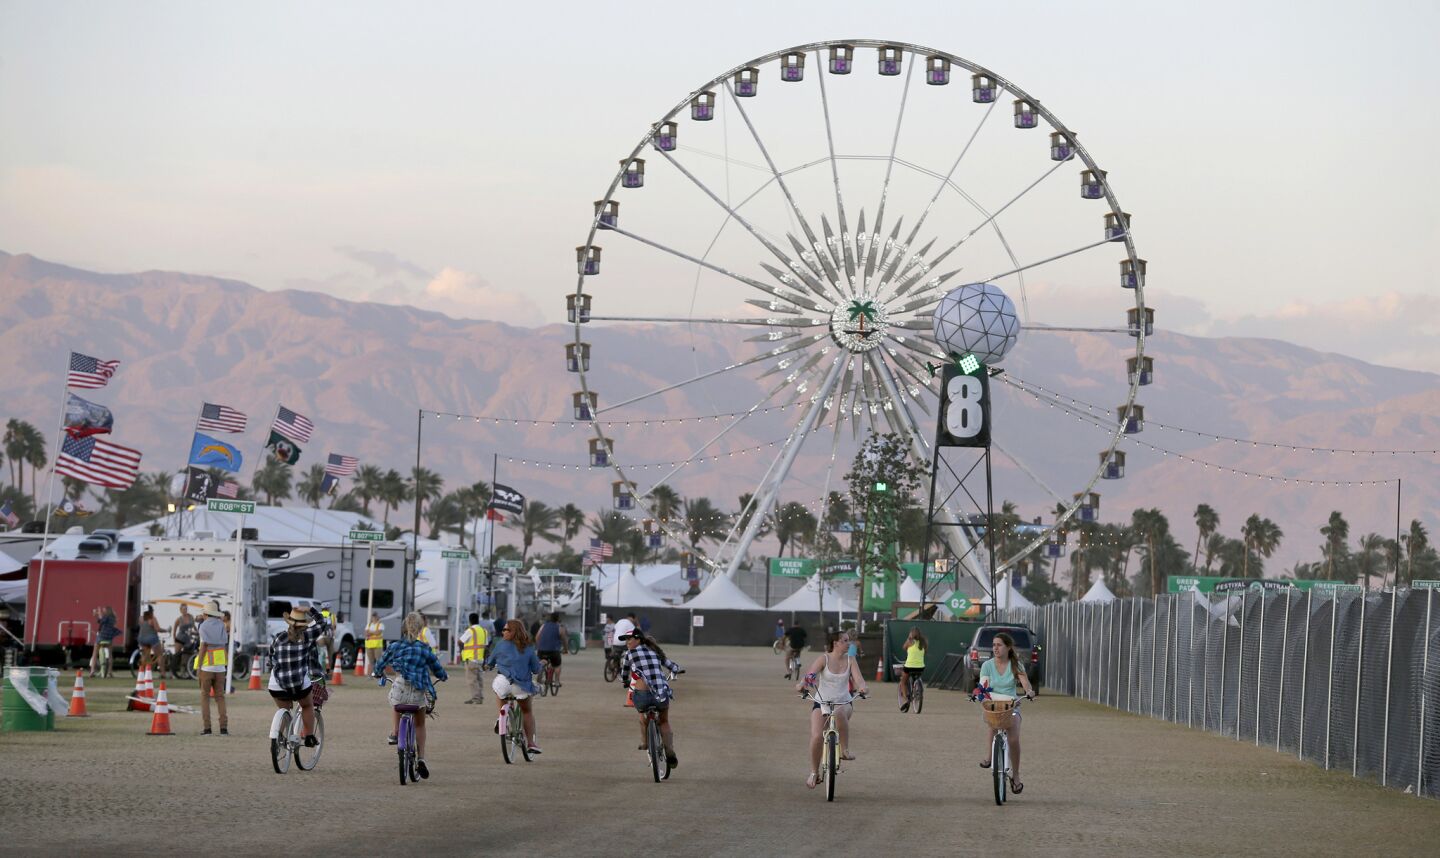 Country music fans ride bikes at dusk at the Stagecoach Country Music Festival.